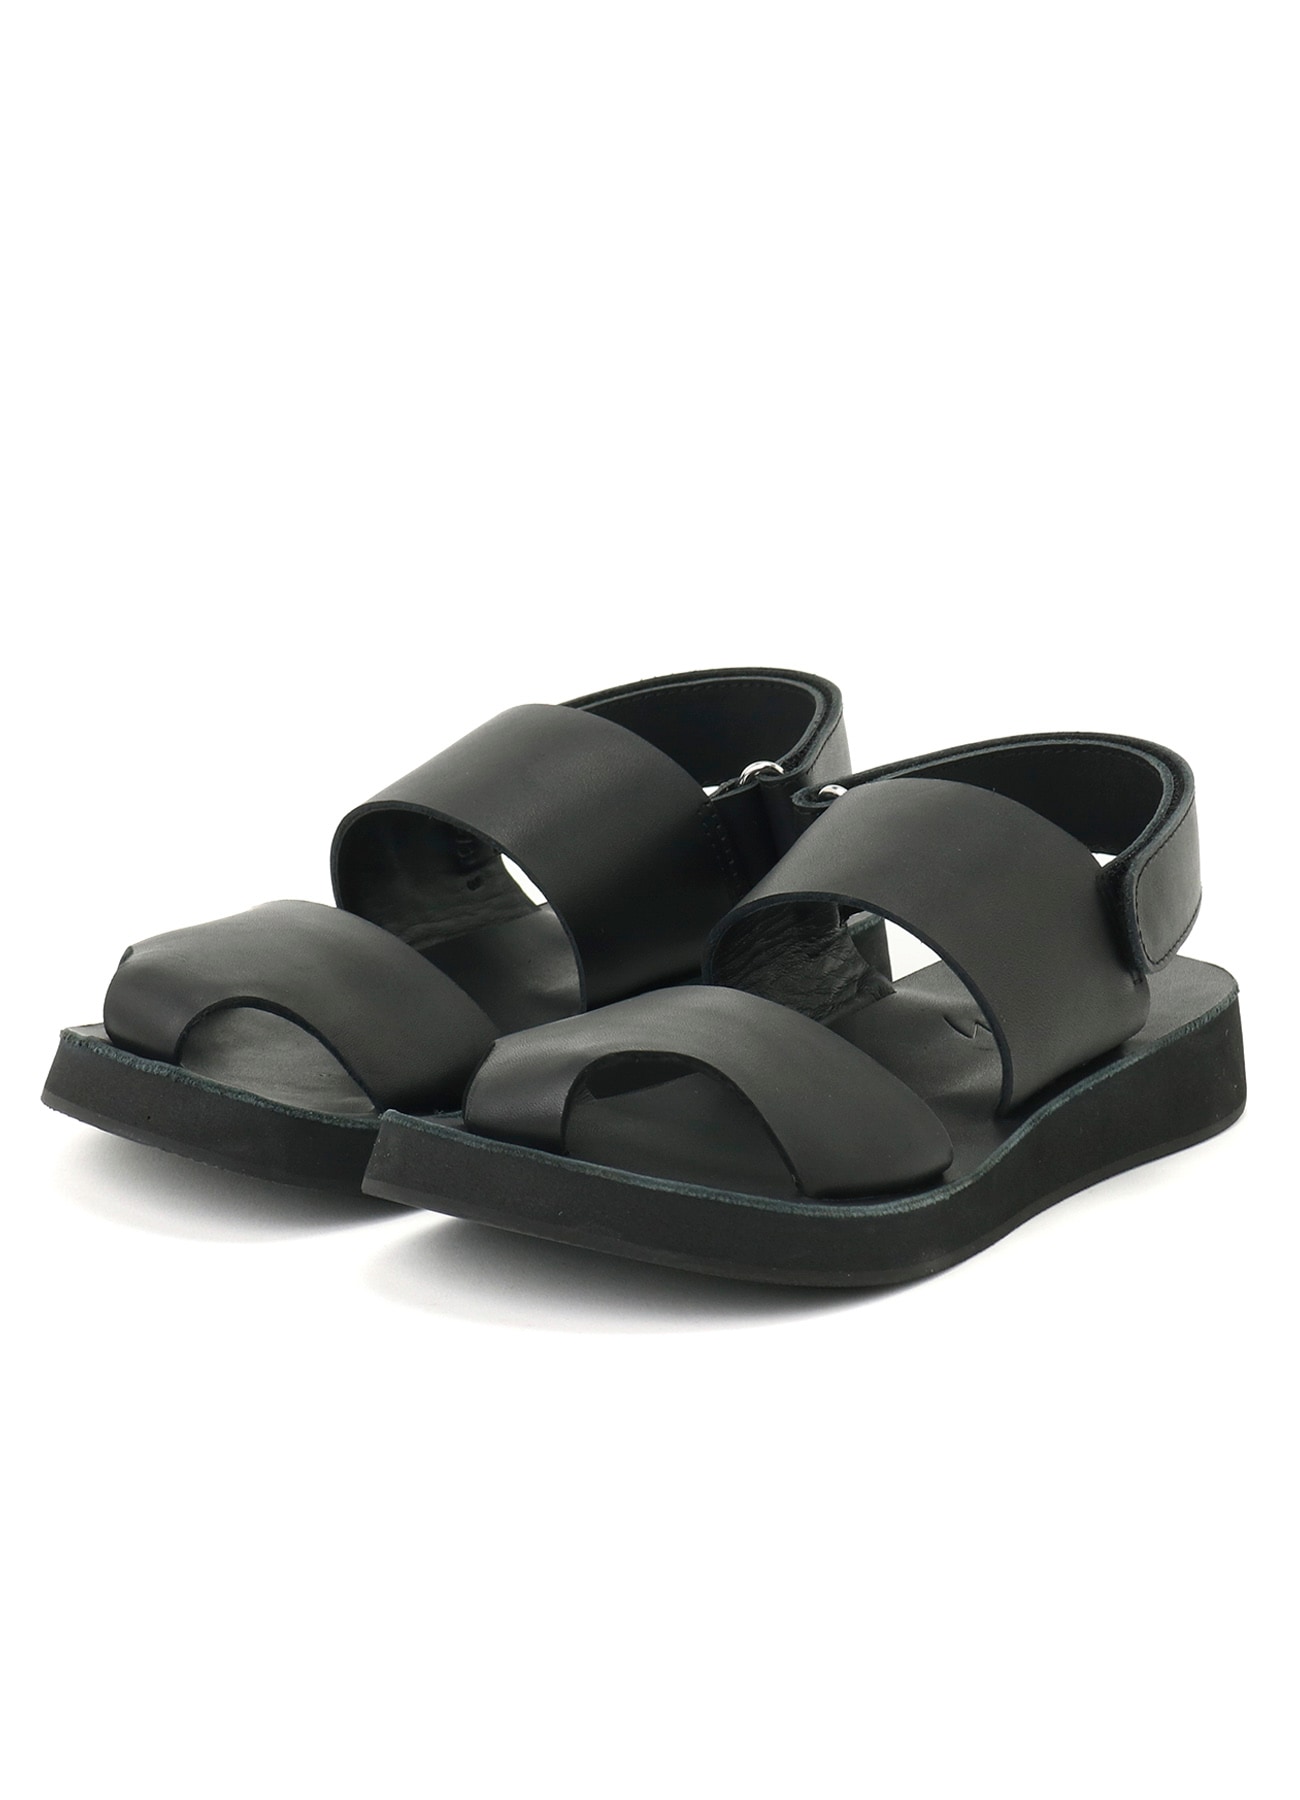 OIL SMOOTH LEATHER STRAP SANDAL